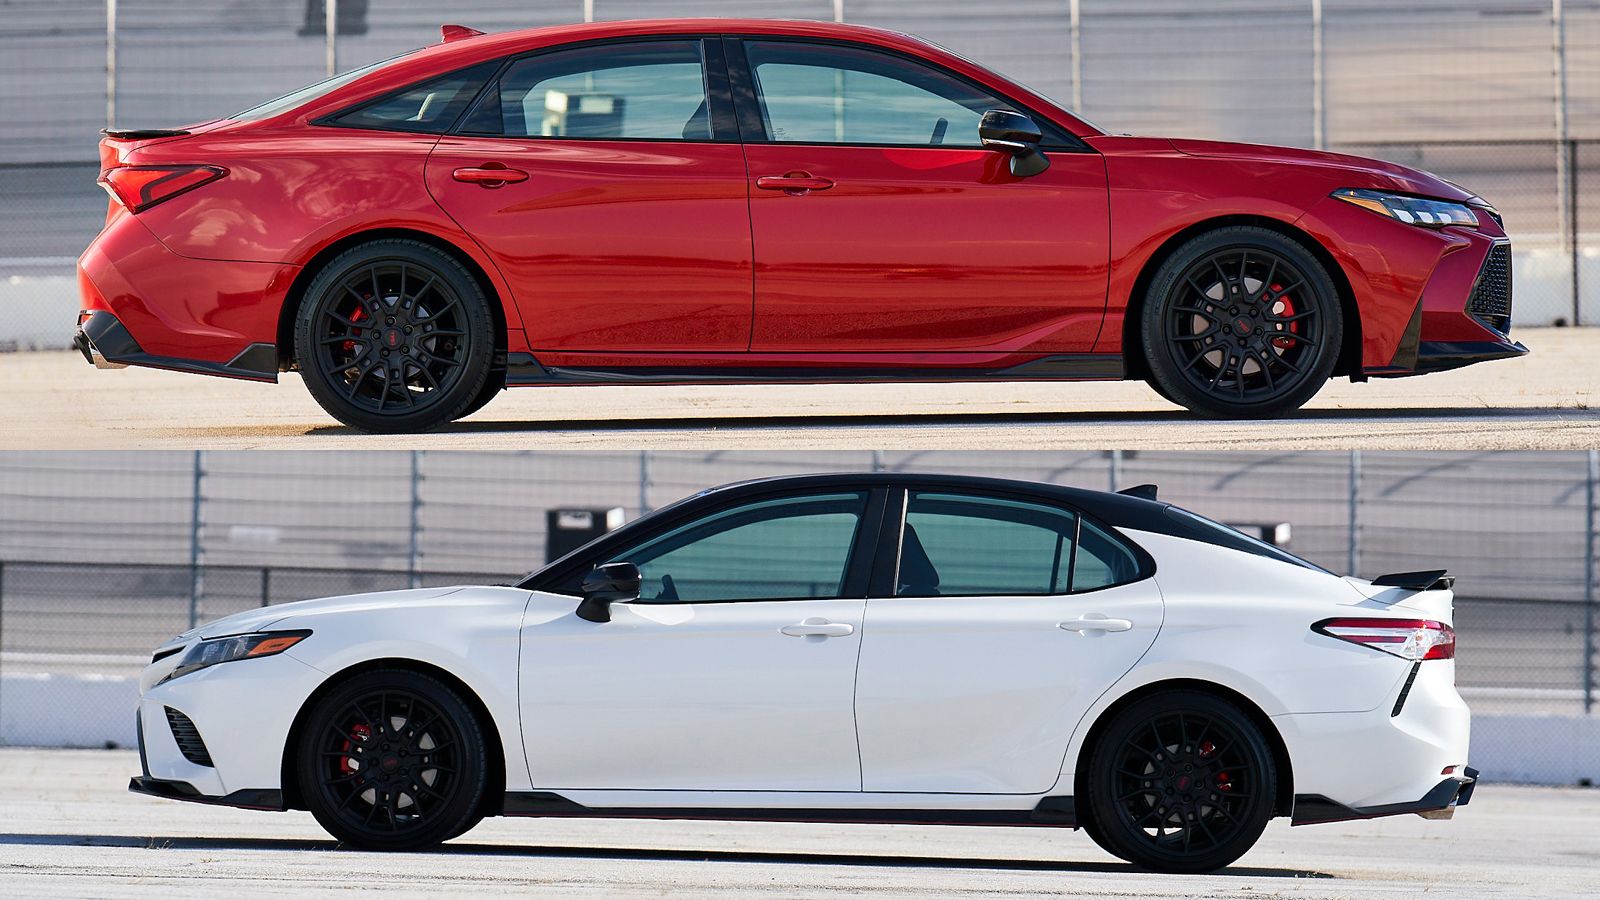 2020 Toyota Camry TRD and Avalon TRD road test: Everything you need to know